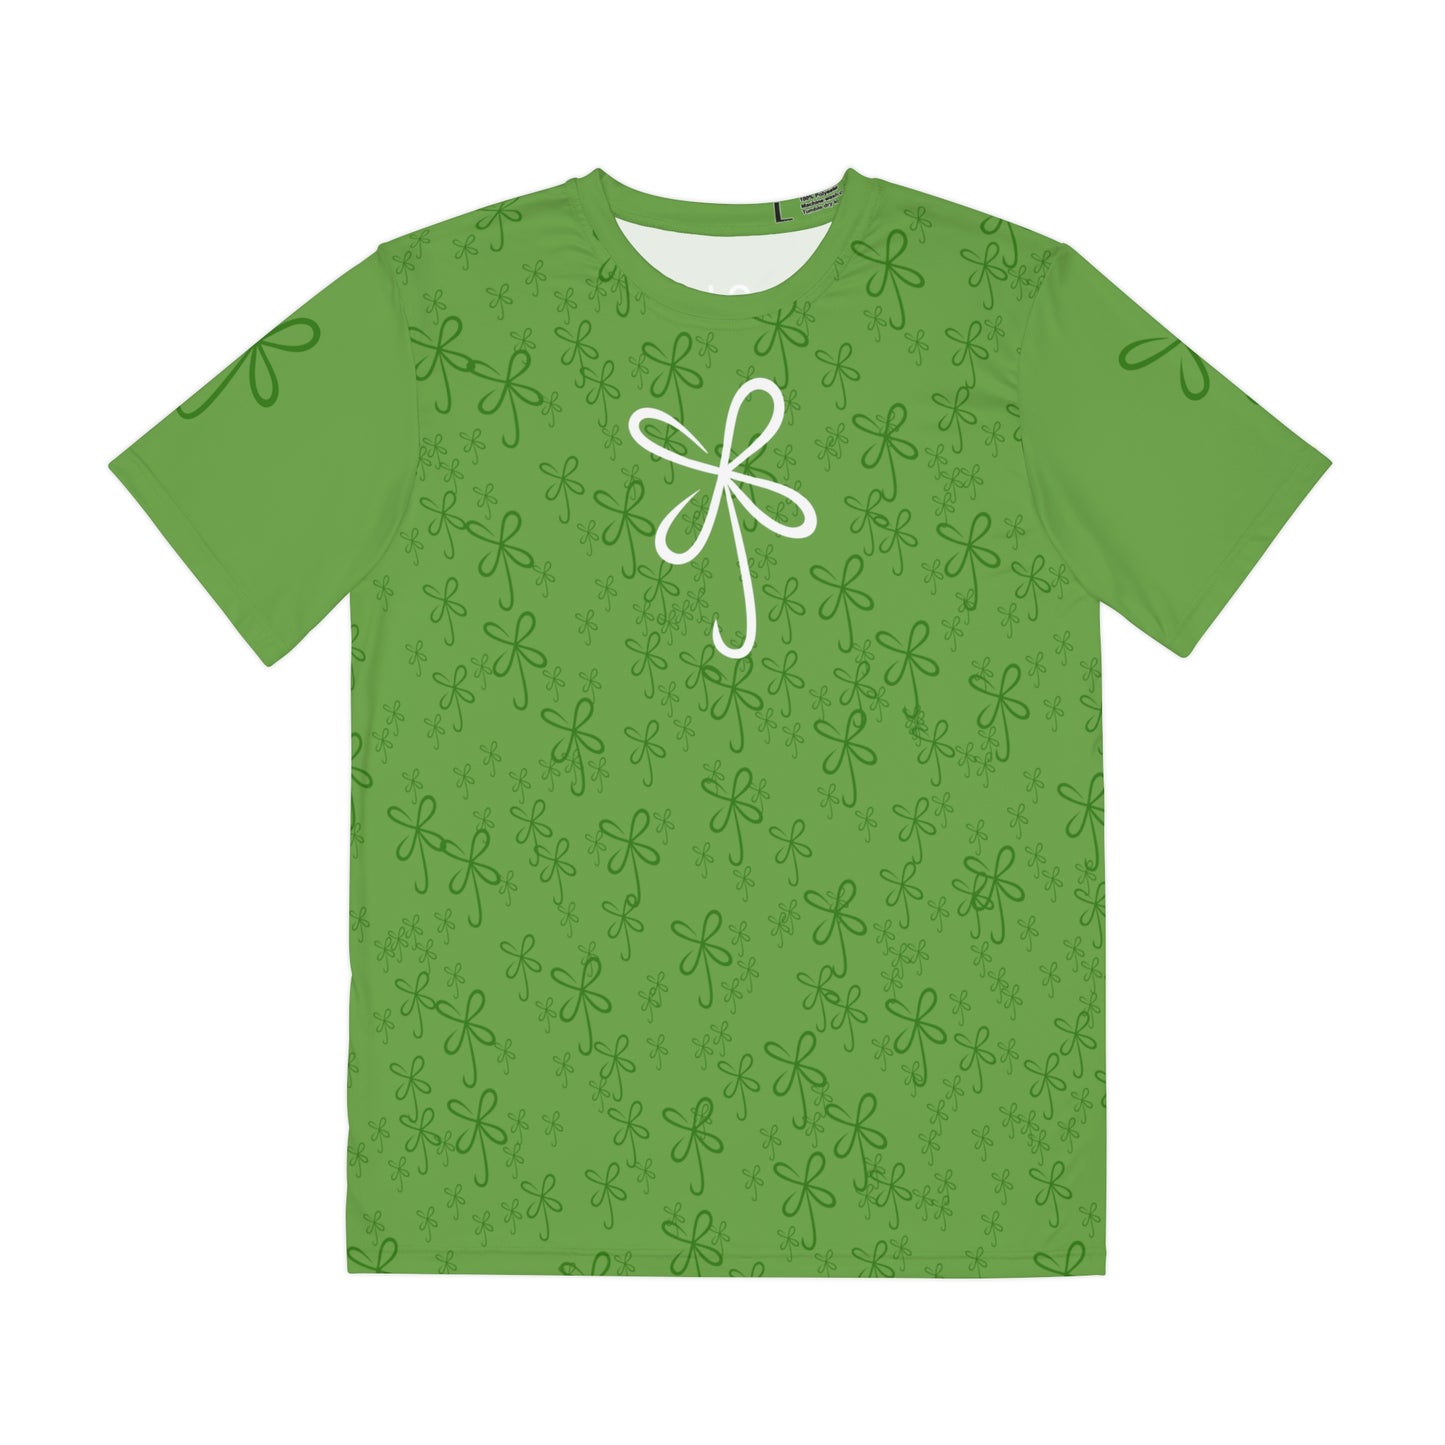 CLVR Green Change Your Luck Tee